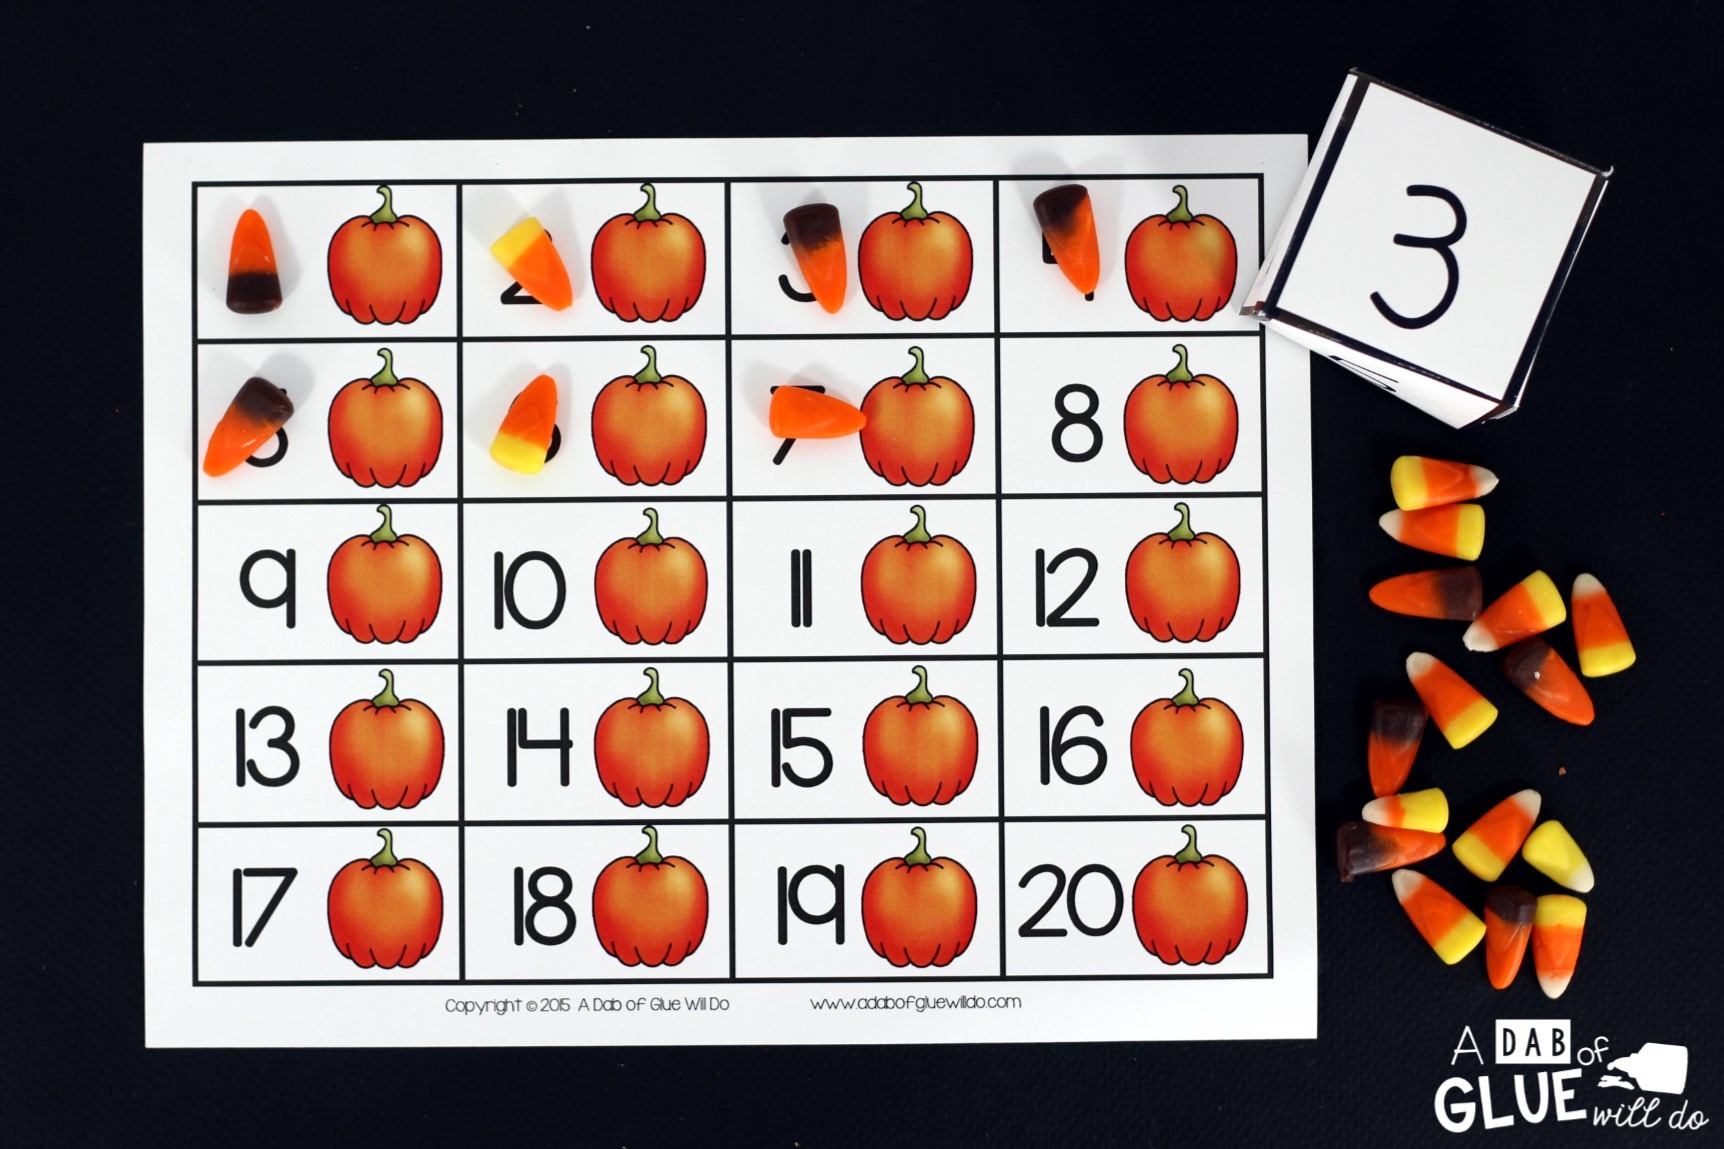 Engage your class in an exciting hands-on experience learning more about pumpkins! This Pumpkin Bundle is perfect for centers in Kindergarten, First Grade, and Second Grade classrooms and packed full of inviting student activities. Celebrate Fall with pumpkin themed center student worksheets. Students will learn more about pumpkins using puzzles, worksheets, clip cards, subtraction mats and more! This pack is great for homeschoolers, hands-on kids activities, and to add to your unit studies! Teachers will receive the complete unit for Autumn pumpkin math, science, and literacy activities to help teach about pumpkins to your lower elementary students!